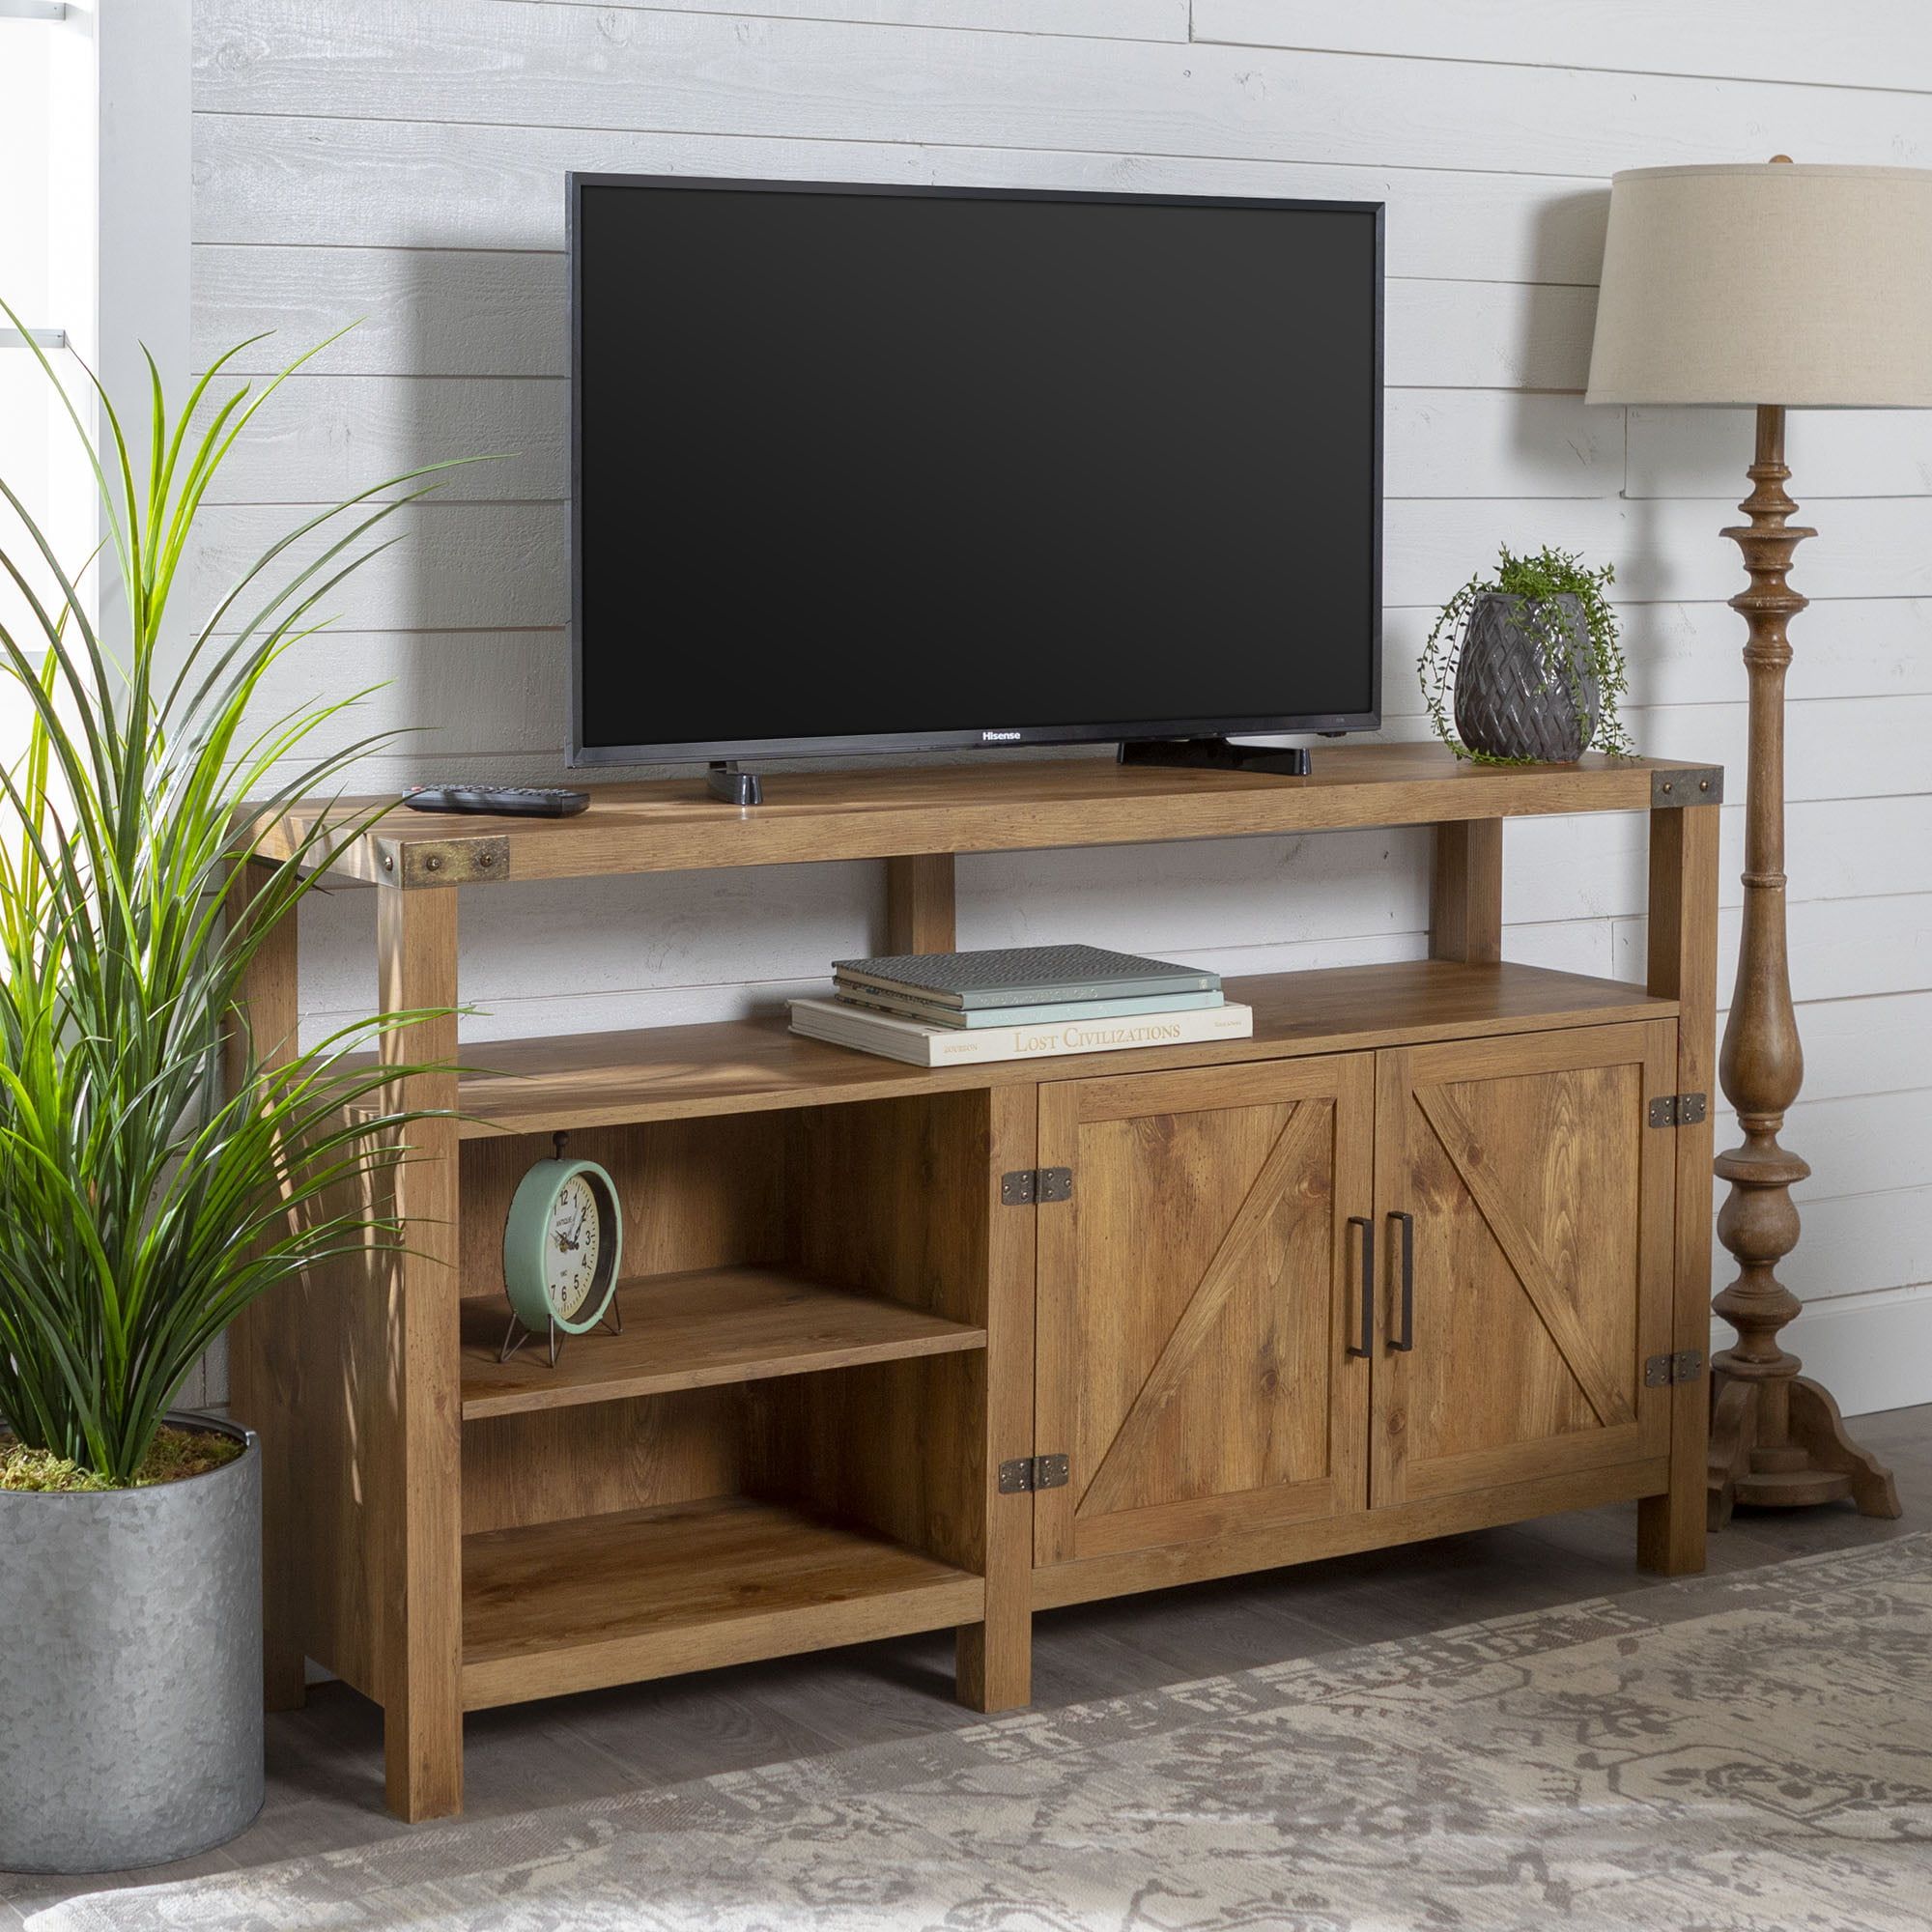 Woven Paths Modern Farmhouse Highboy Tv Stand For Tvs Up To 65 Throughout Modern Farmhouse Barn Tv Stands (View 6 of 20)